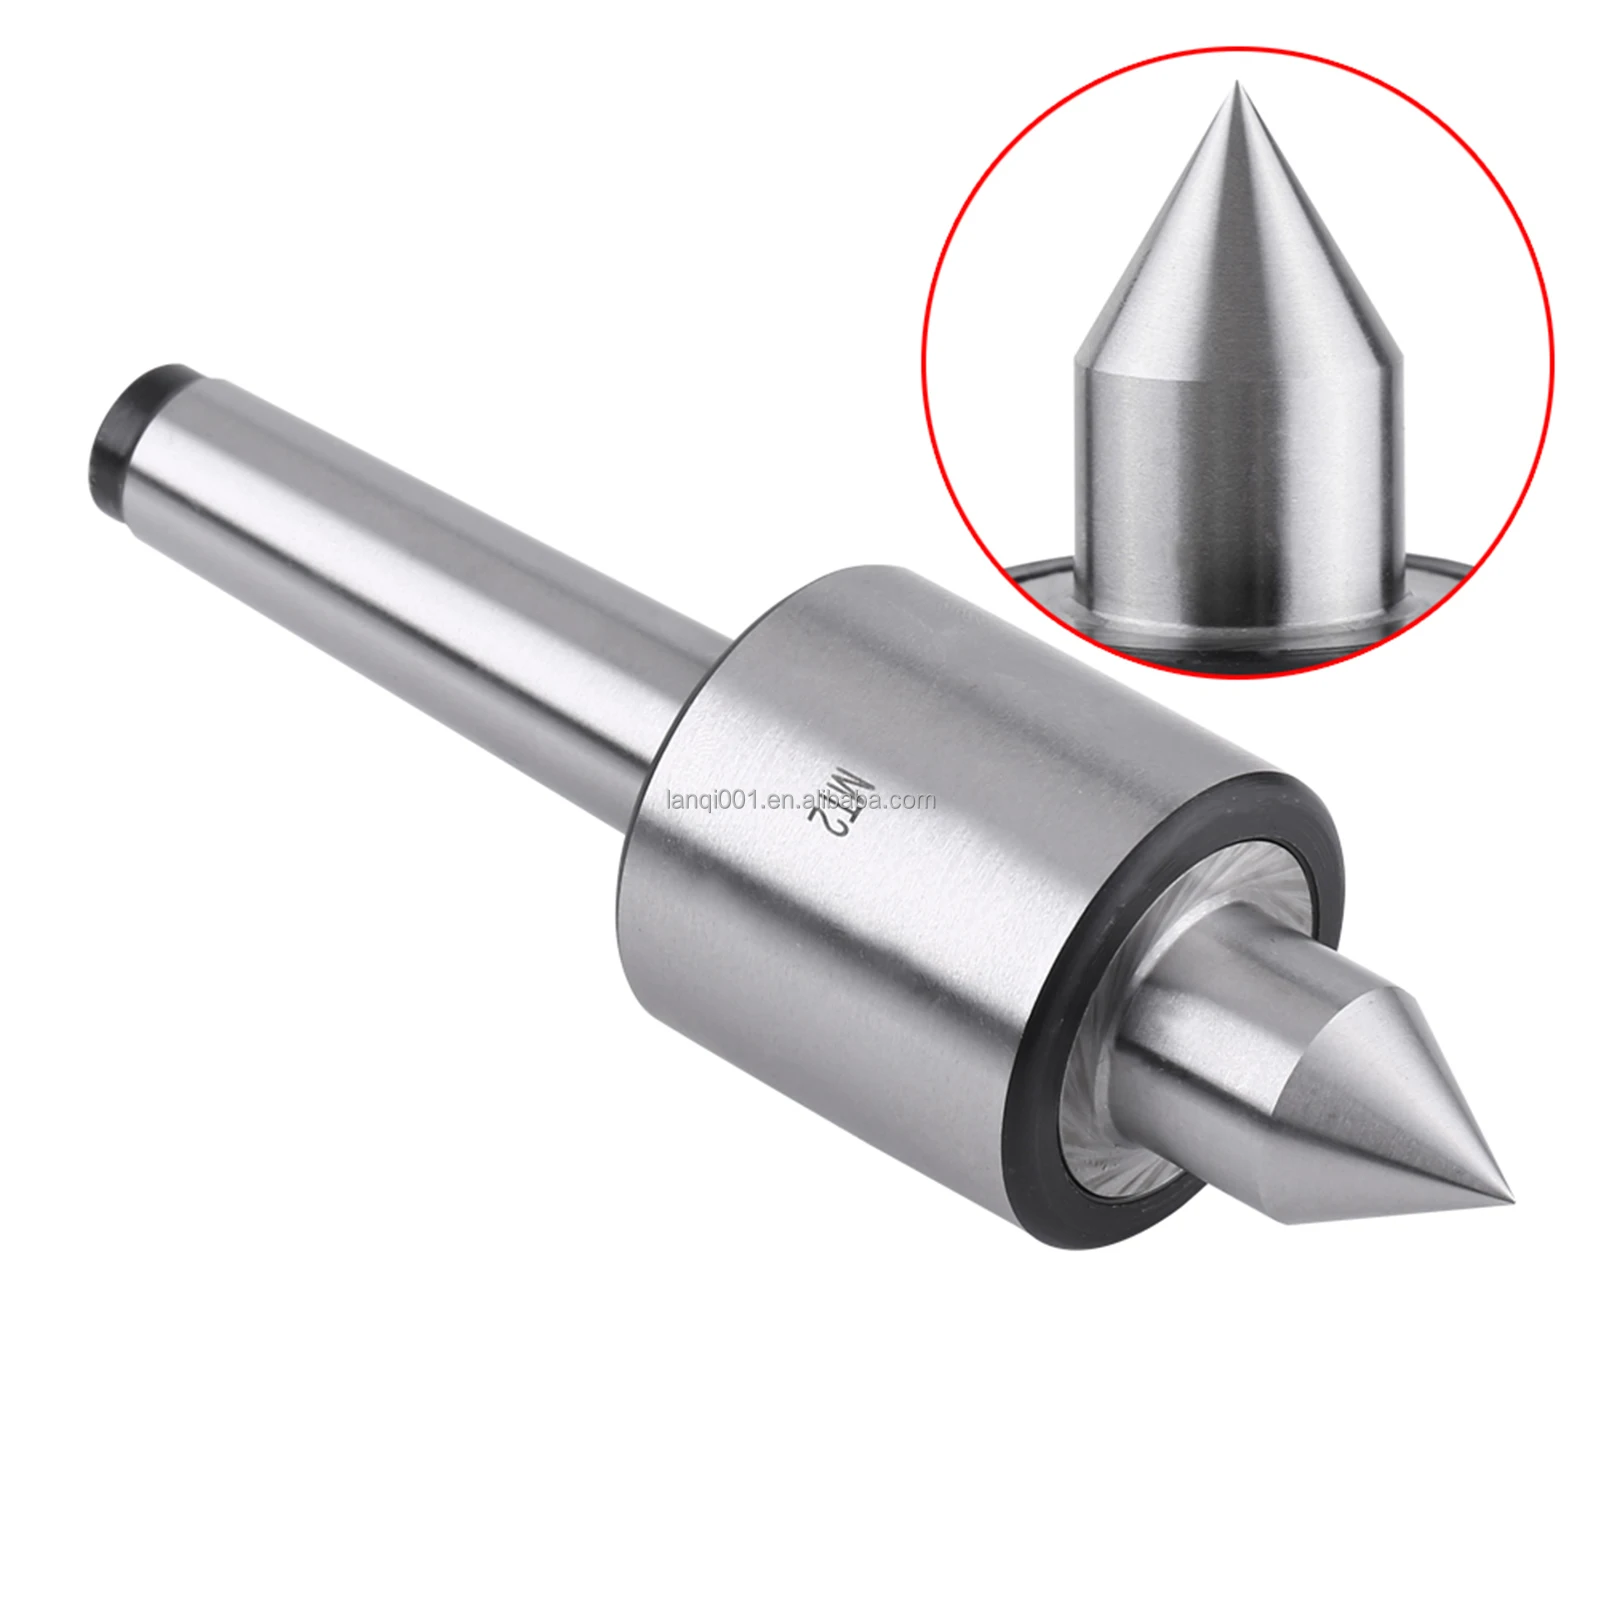 MT2 Precision Rotary Live Revolving Milling Center Taper Metal Work Lathe Tool for High Speed Turning CNC Work MT2 Live Center 